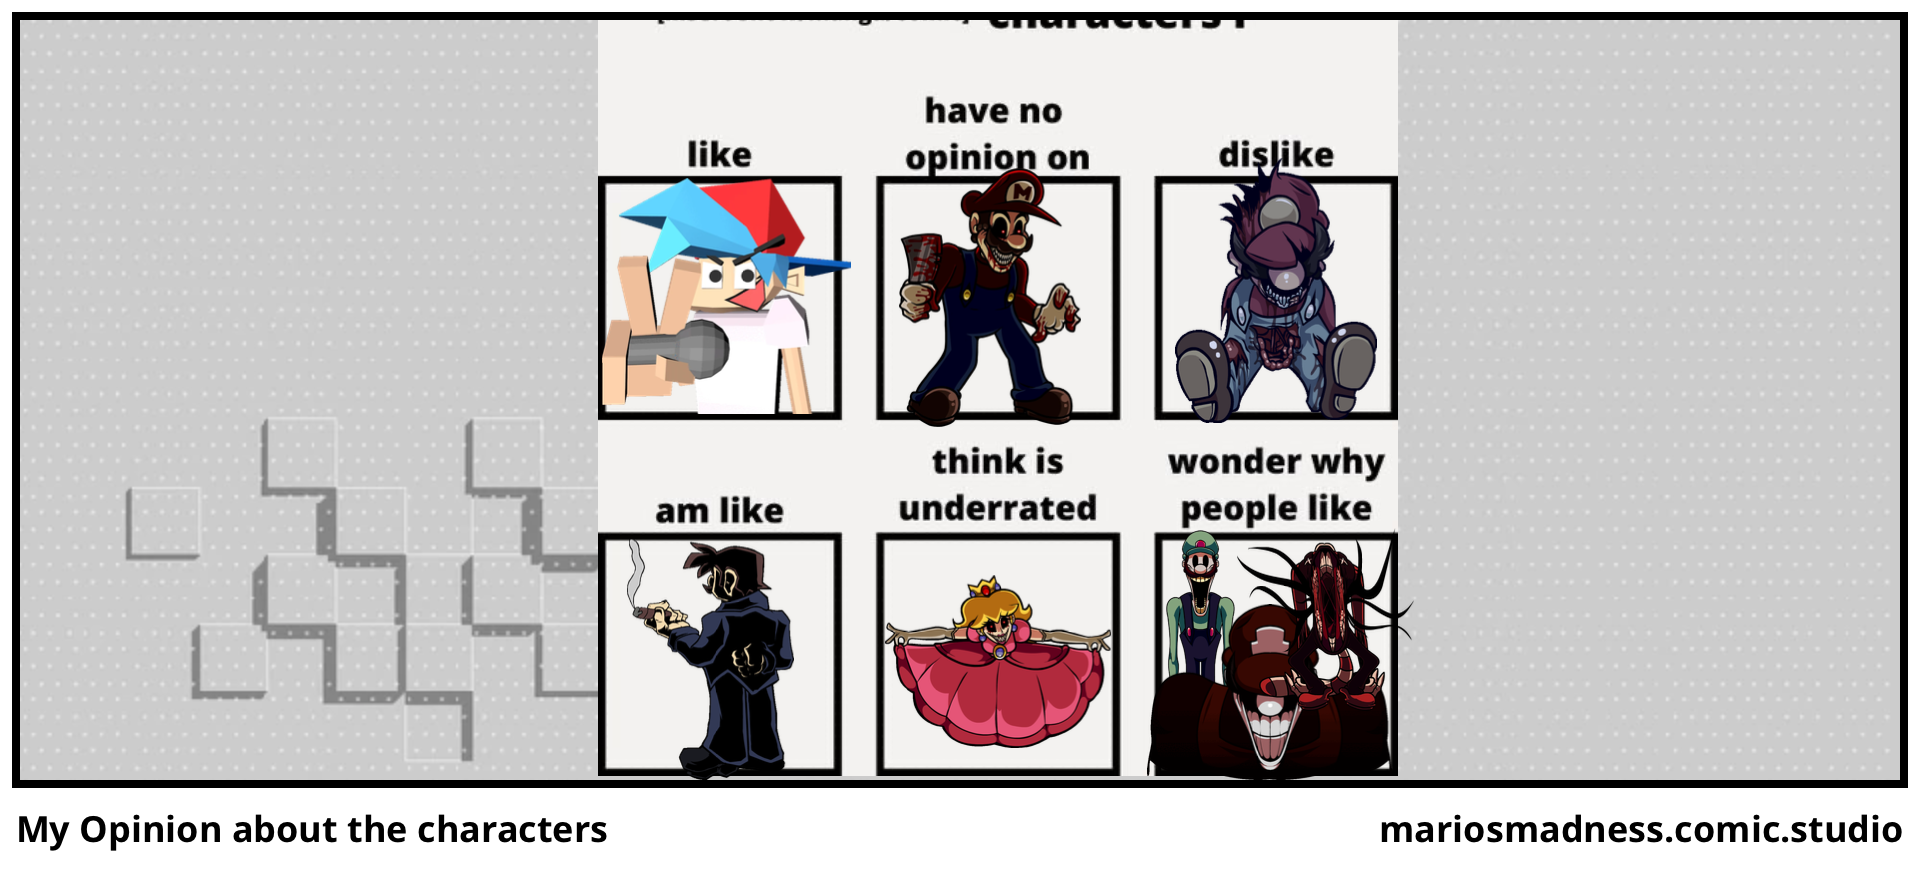 My Opinion about the characters